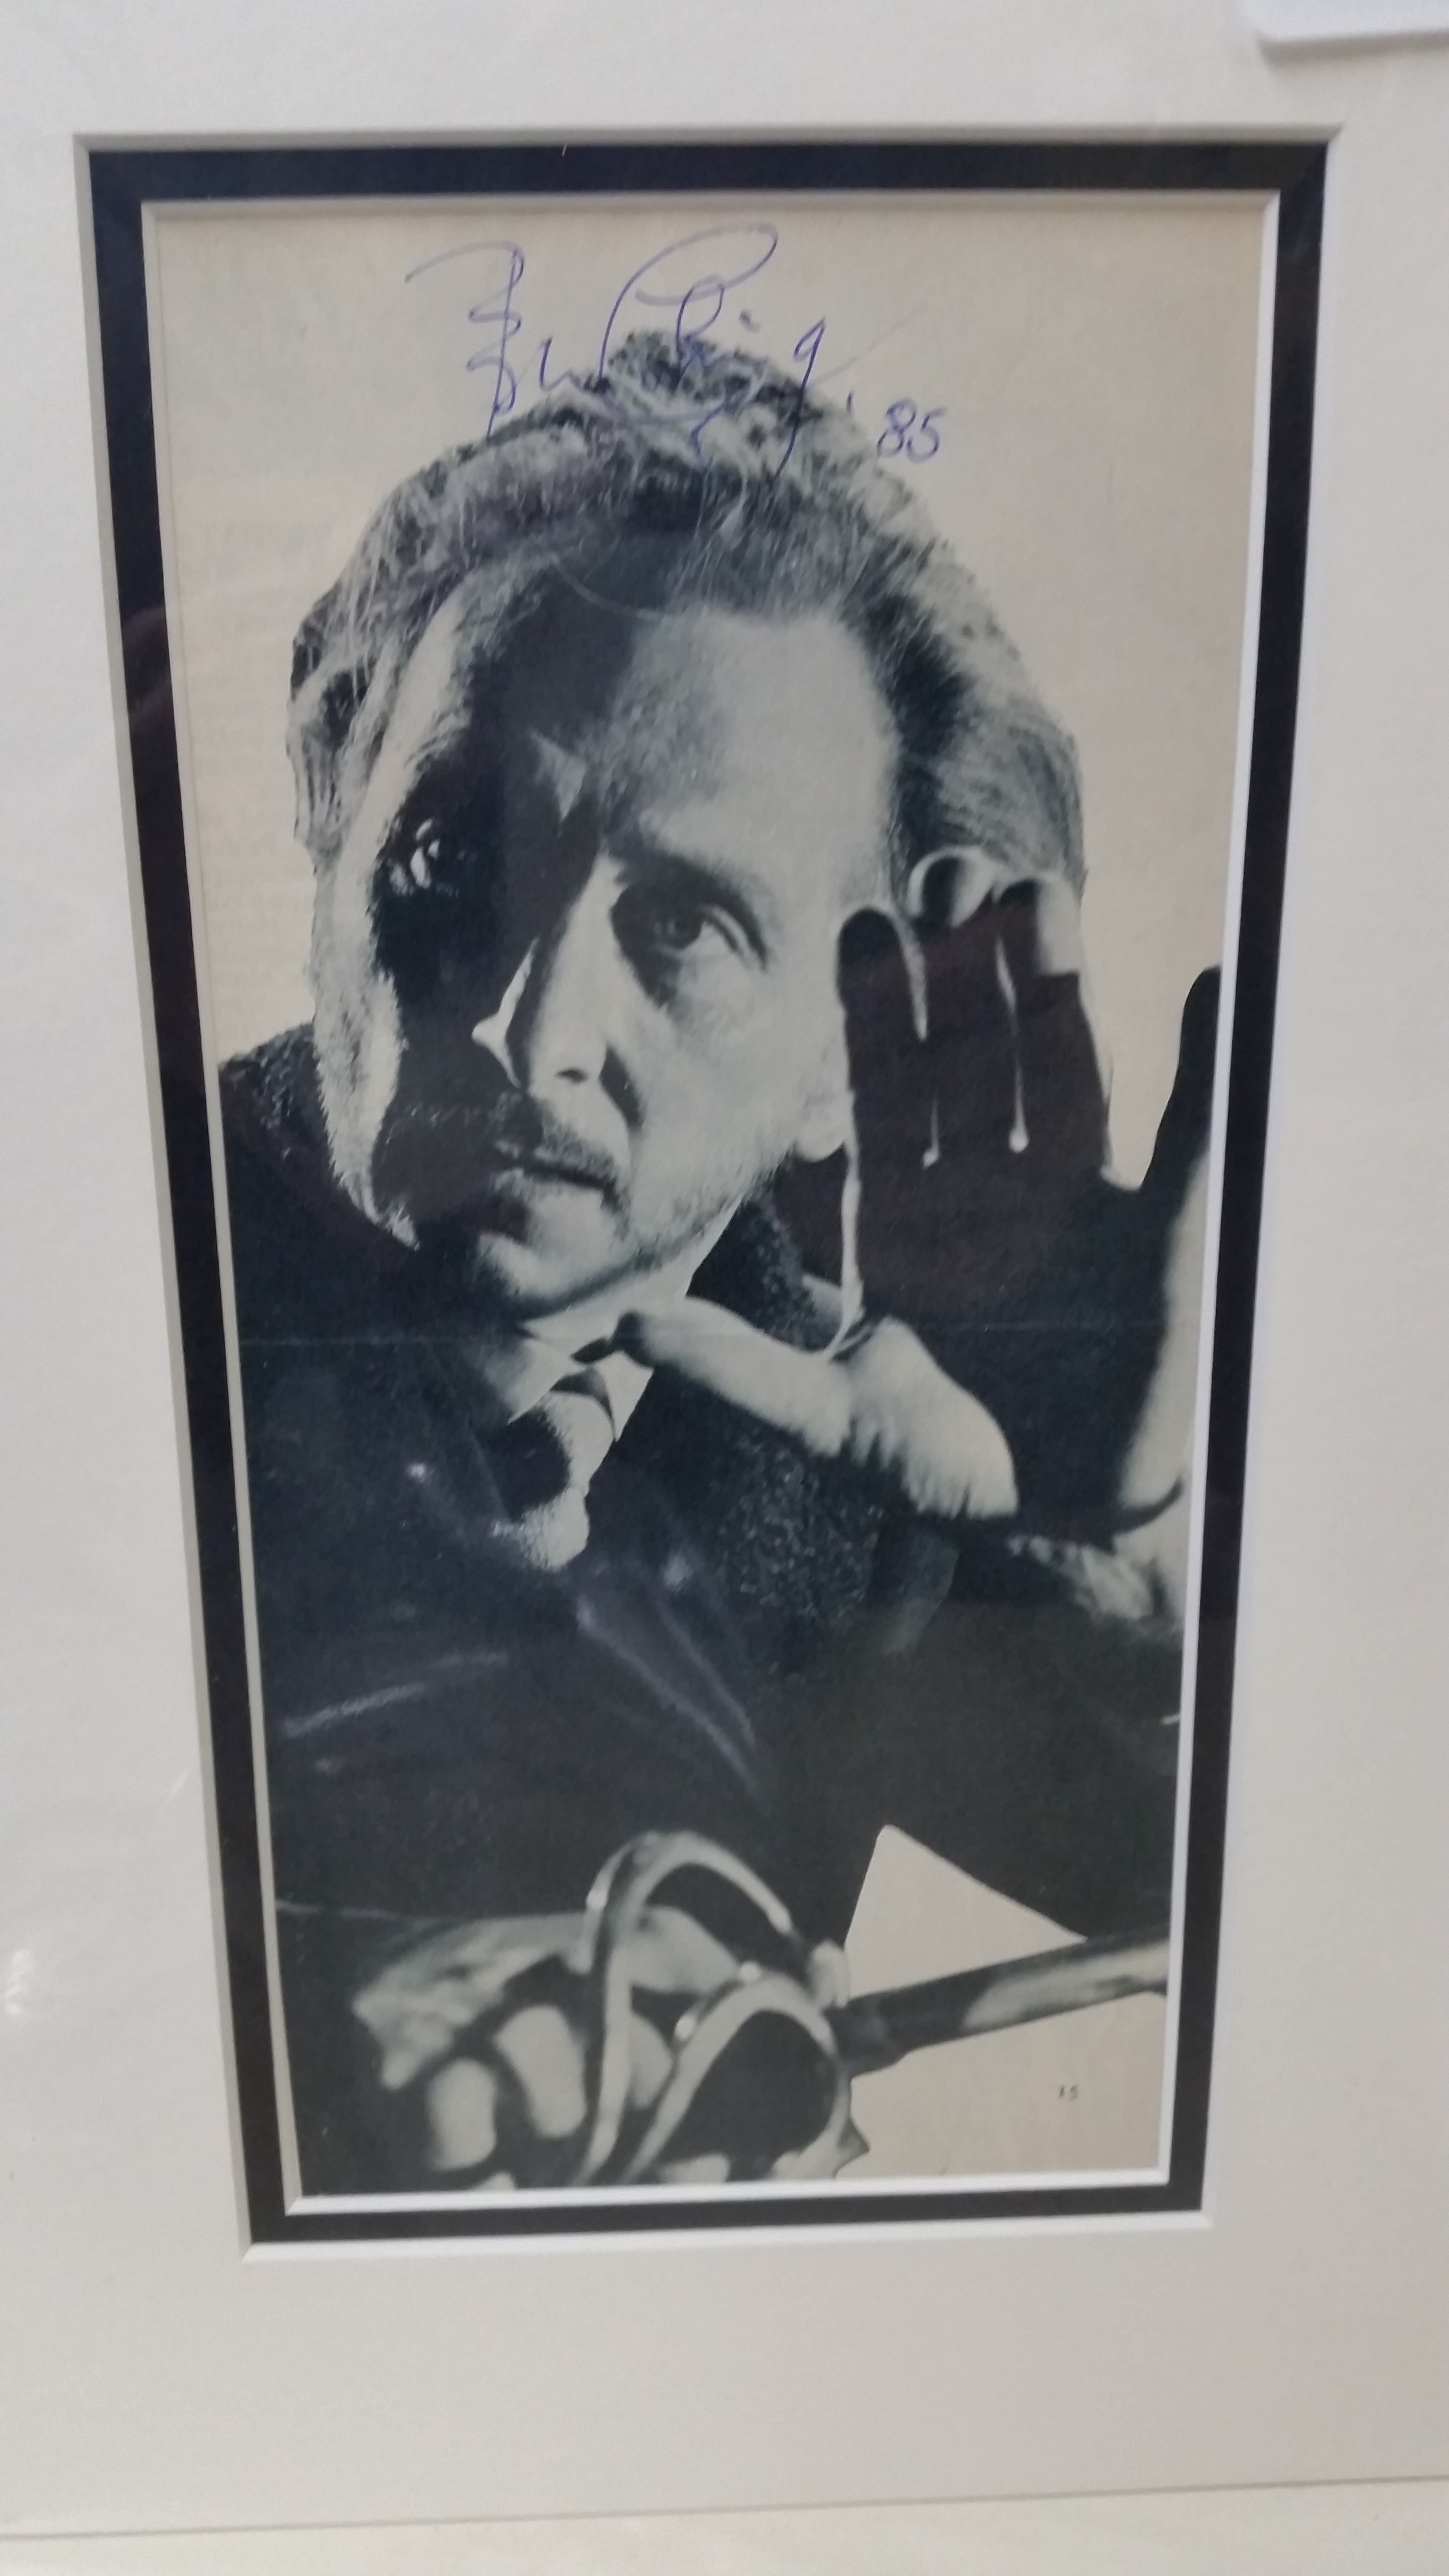 CINEMA, signed magazine photo by Peter Cushing, h/s in character, overmounted, 8.5 x 13 overall, VG